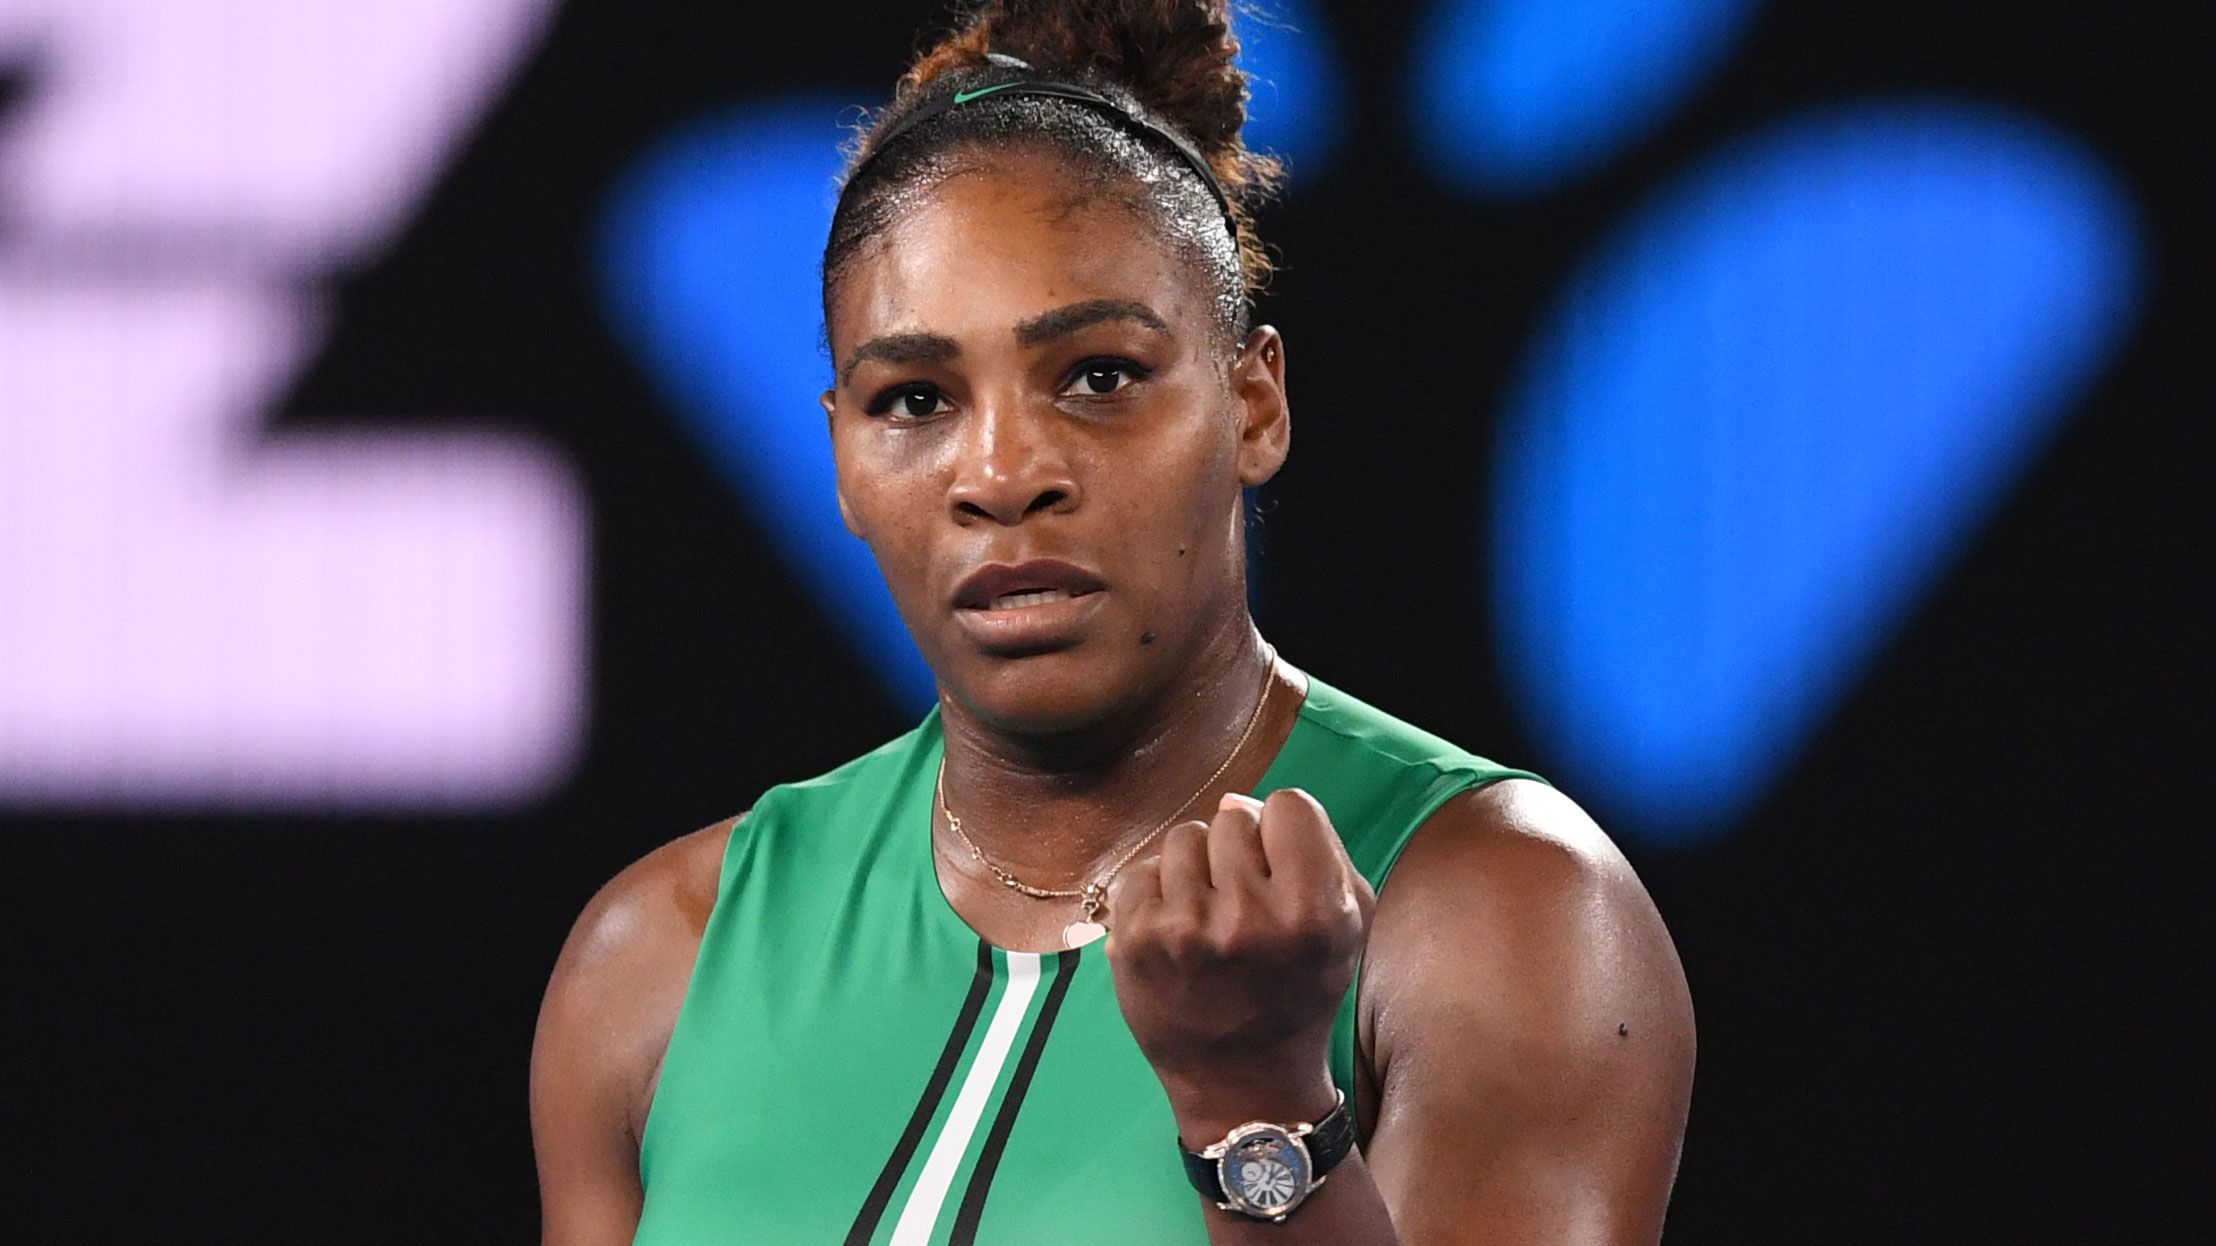 Serena Williams shows true grit to outlast Simona Halep in epic fourth round match